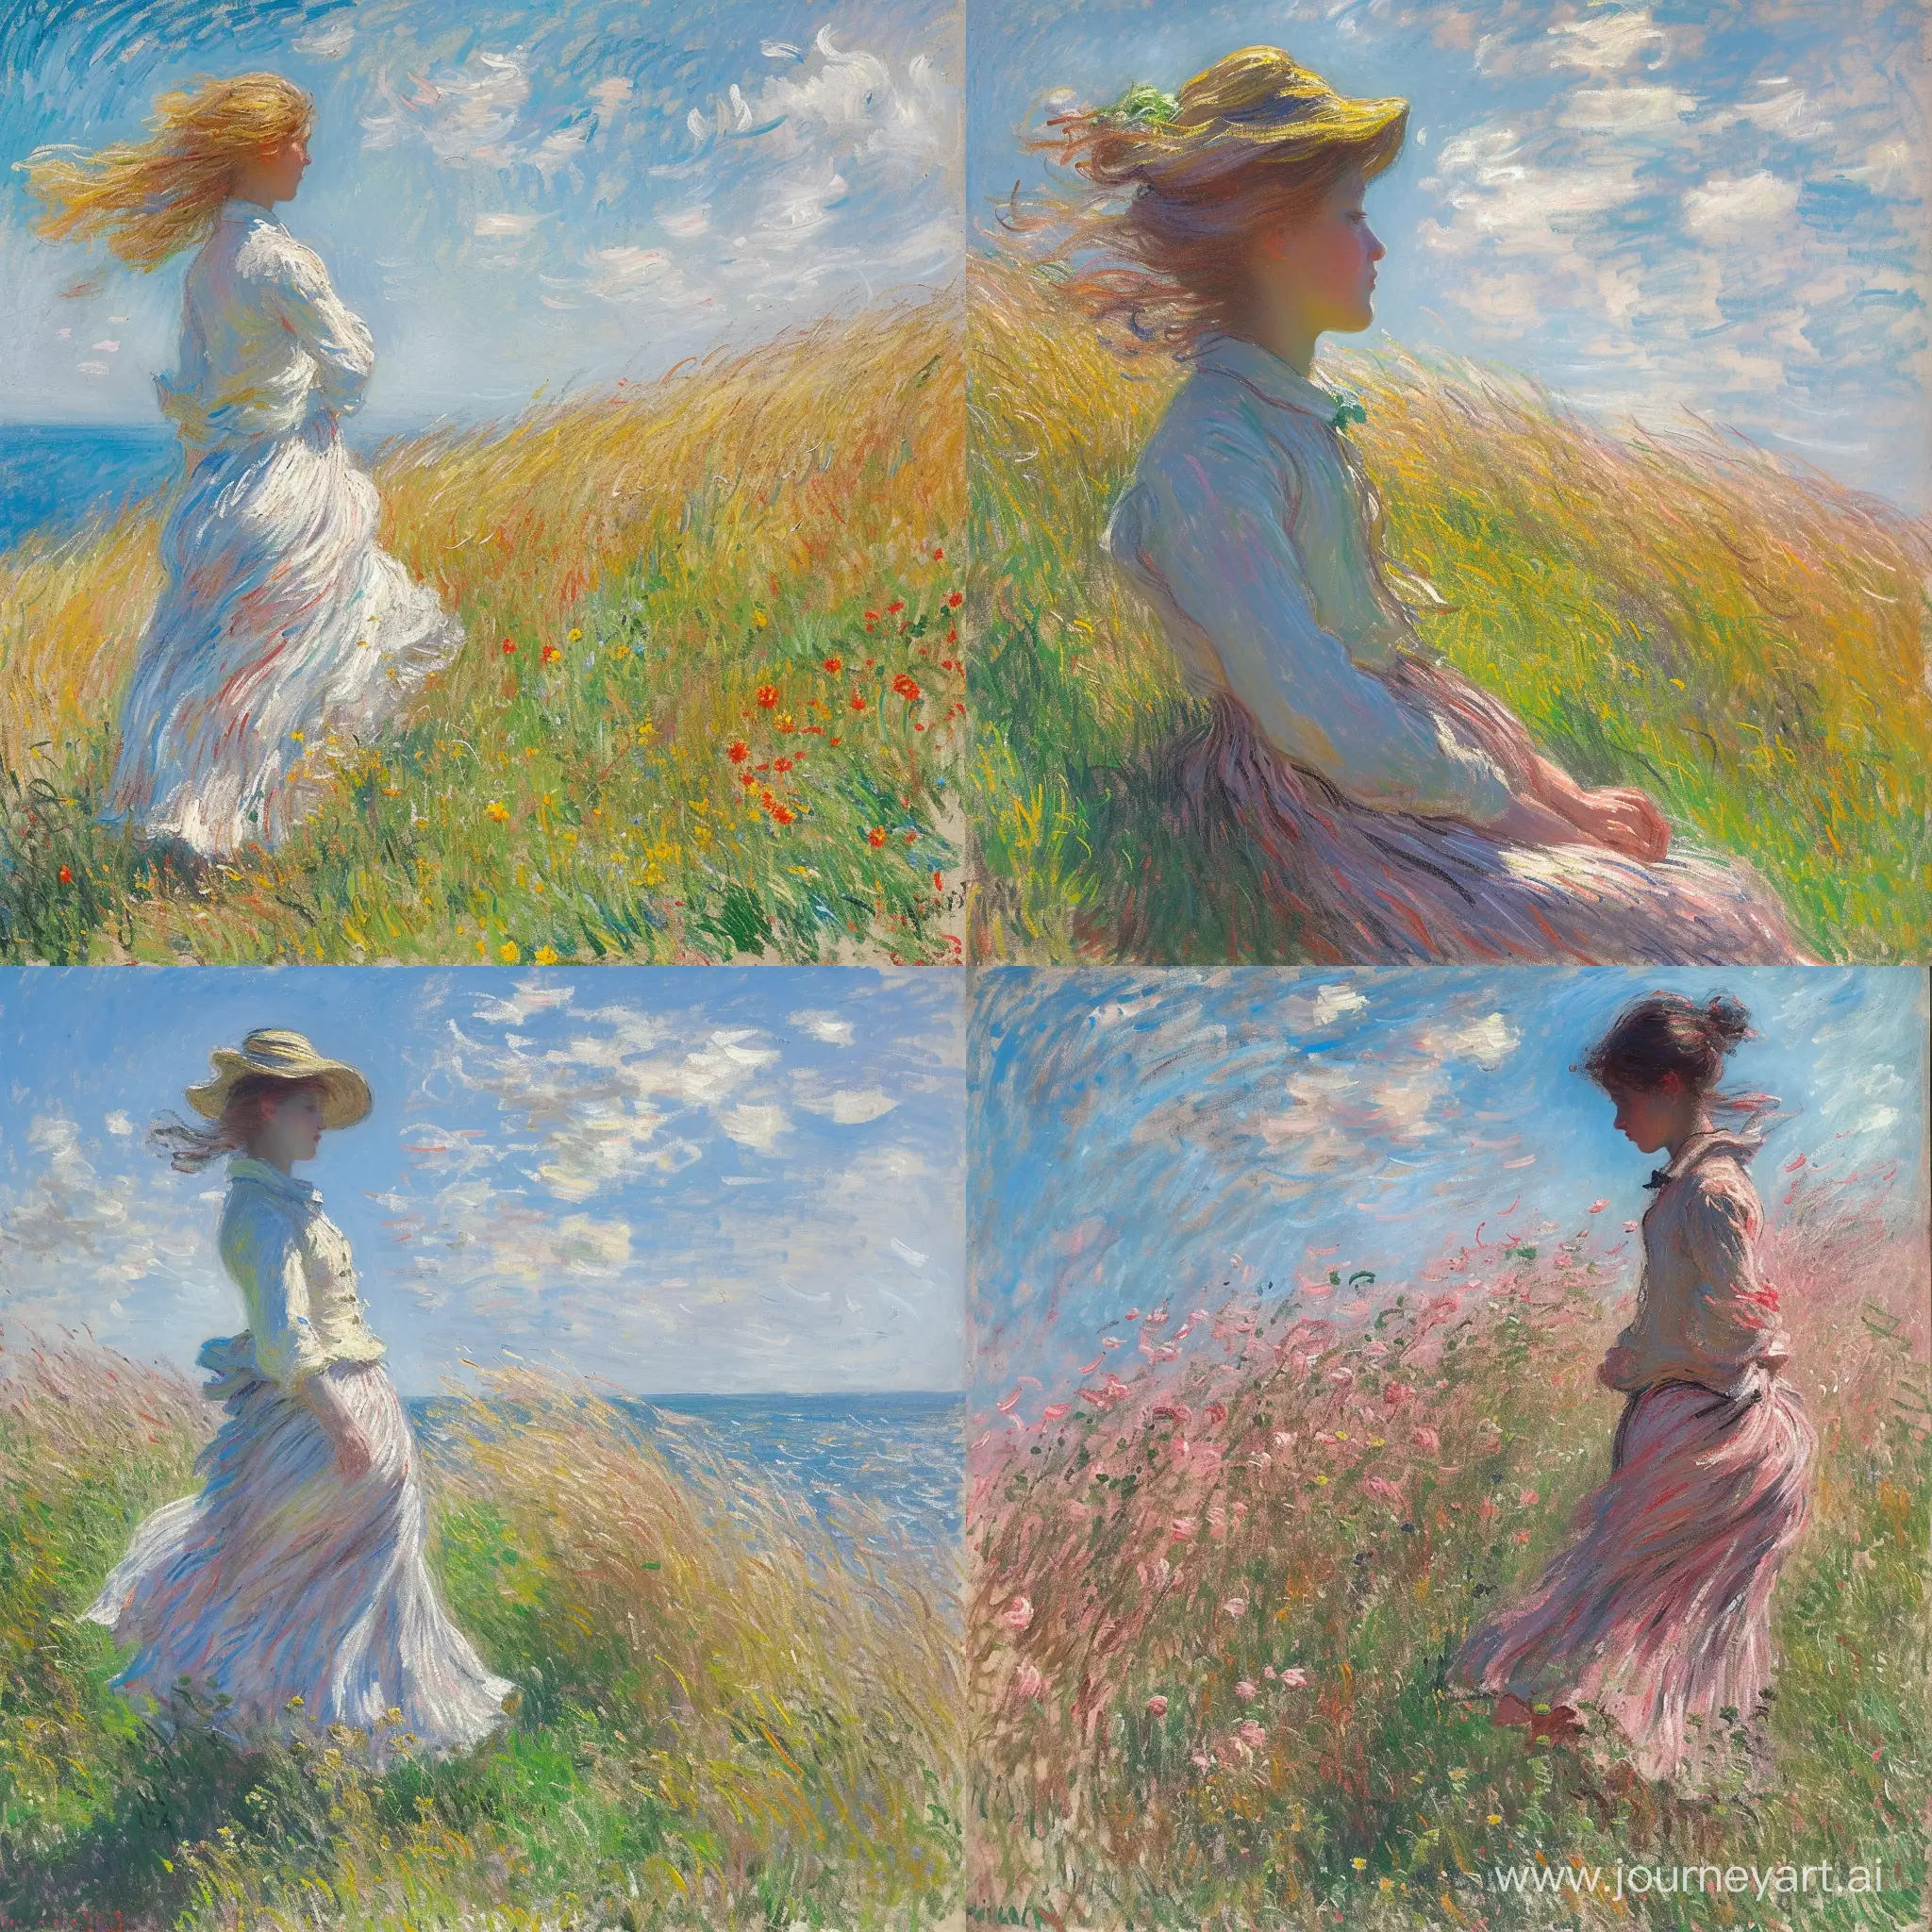 Monets-Youthful-Wind-Serene-Portrait-with-a-Gaze-Towards-the-Right